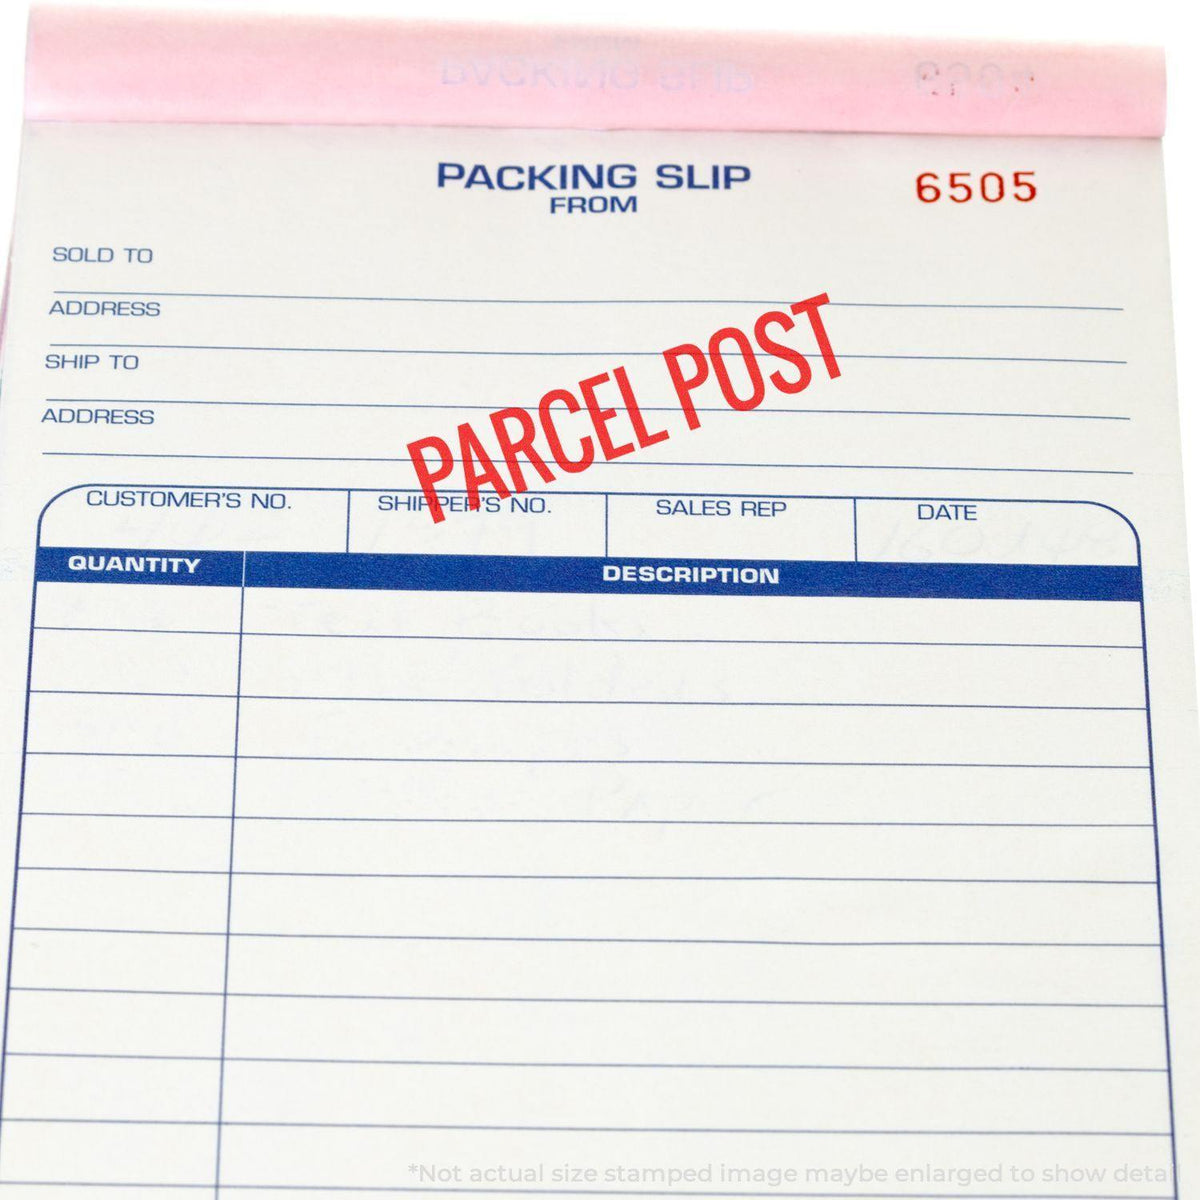 Large Parcel Post Rubber Stamp Lifestyle Photo